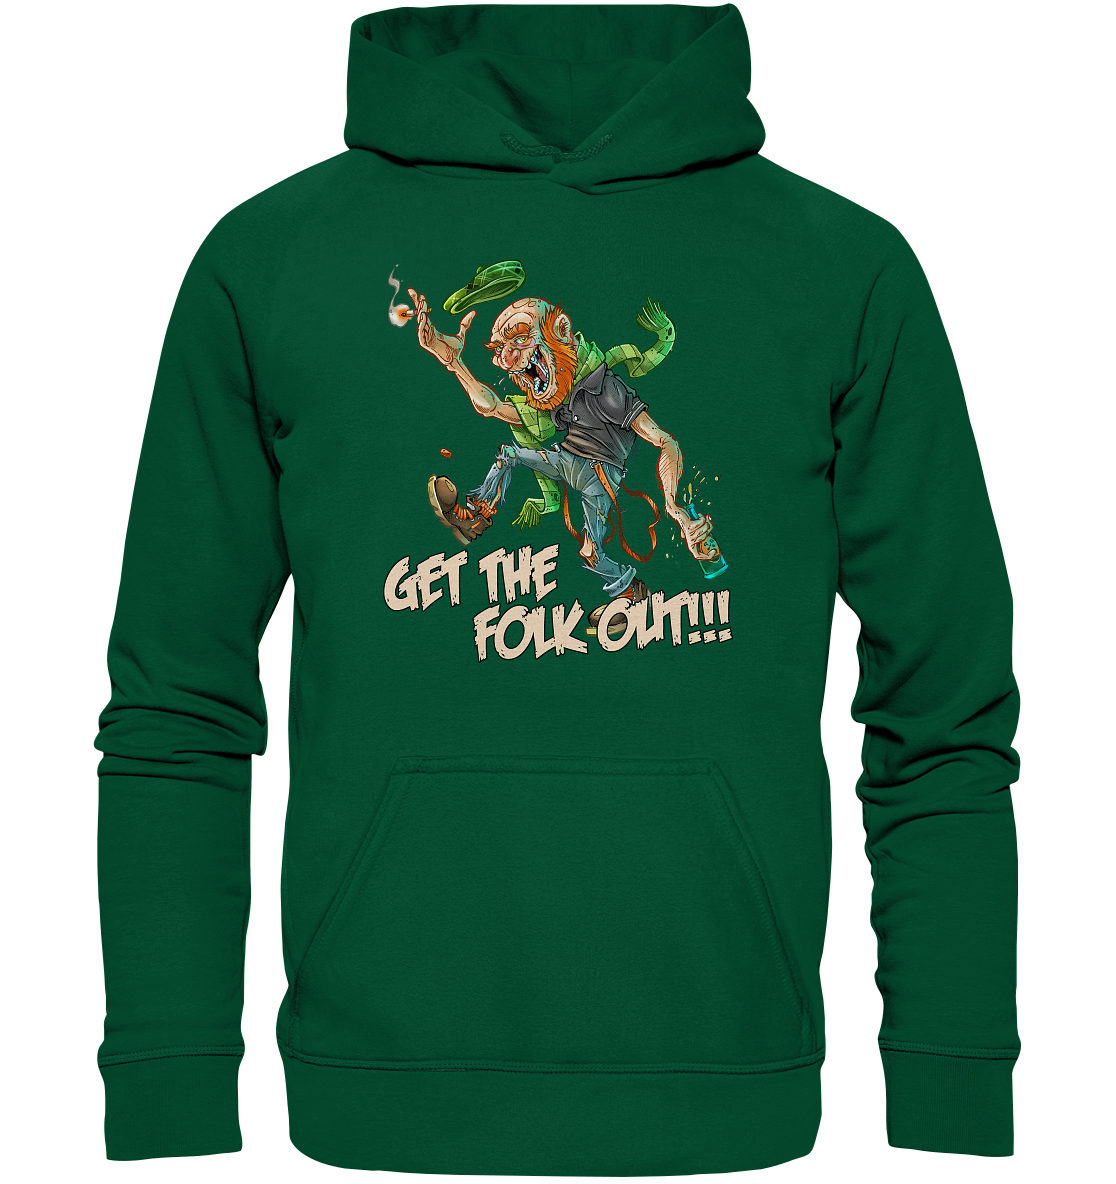 Get The Folk Out - Basic Unisex Hoodie